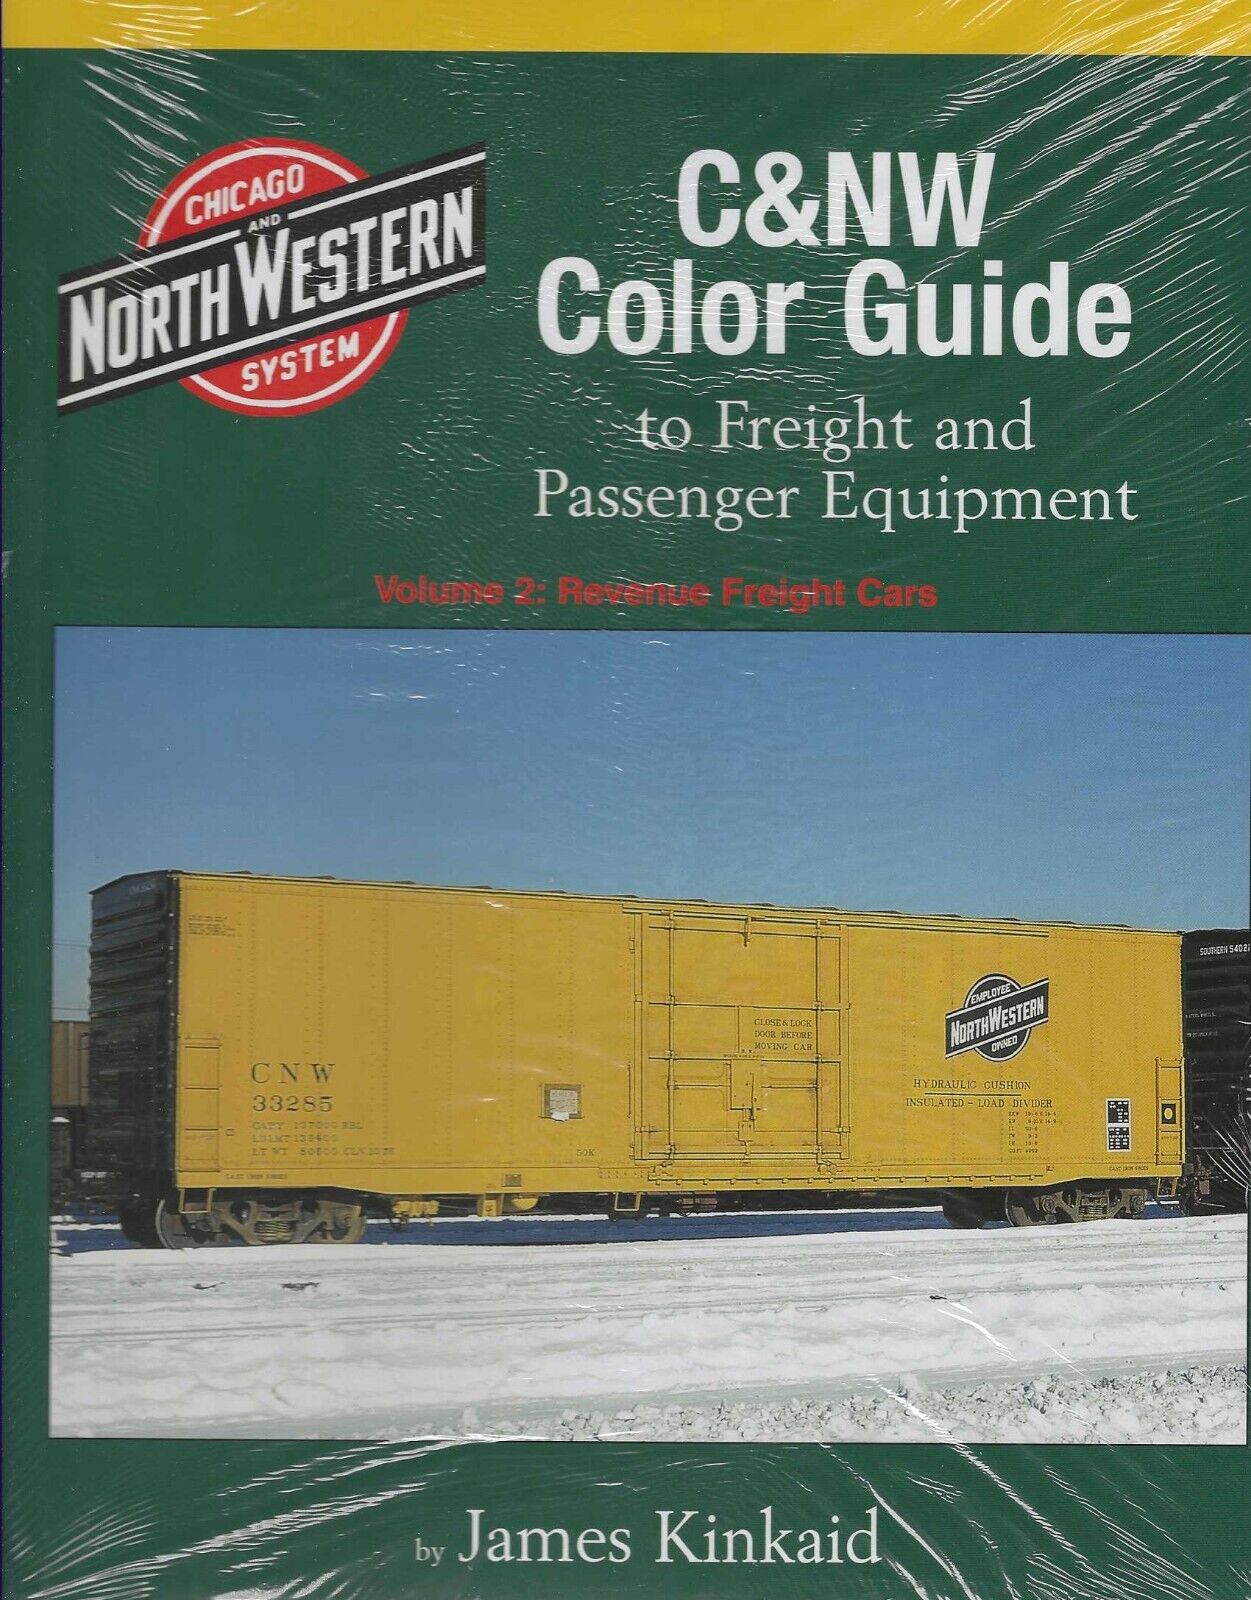 C&NW COLOR GUIDE, Vol. 2: Revenue Freight Cars (BRAND NEW BOOK)